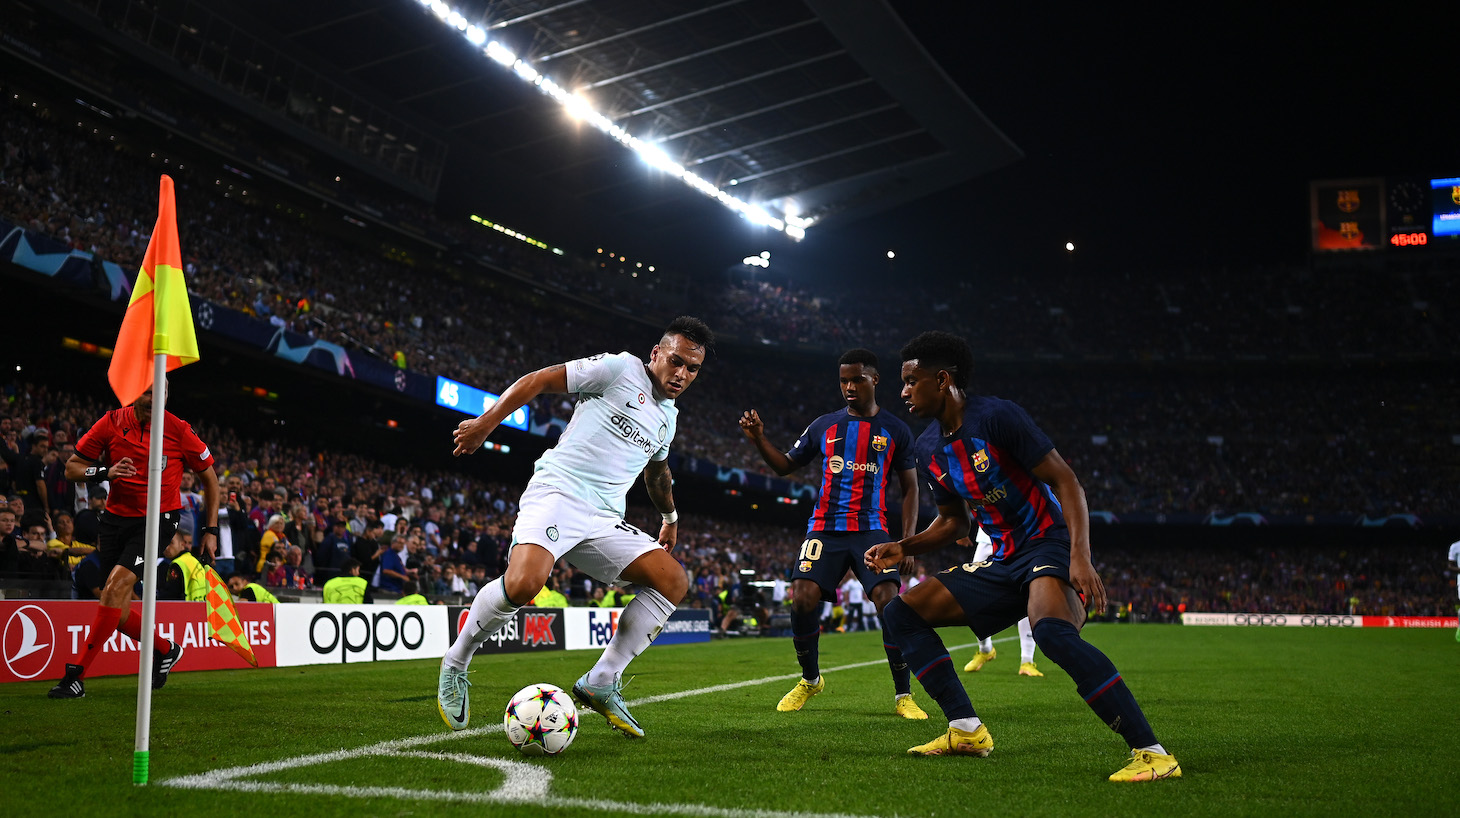 Lautaro Martinez of FC Internazionale in action during the UEFA Champions League group C match between FC Barcelona and FC Internazionale at Spotify Camp Nou on October 12, 2022 in Barcelona, Spain.